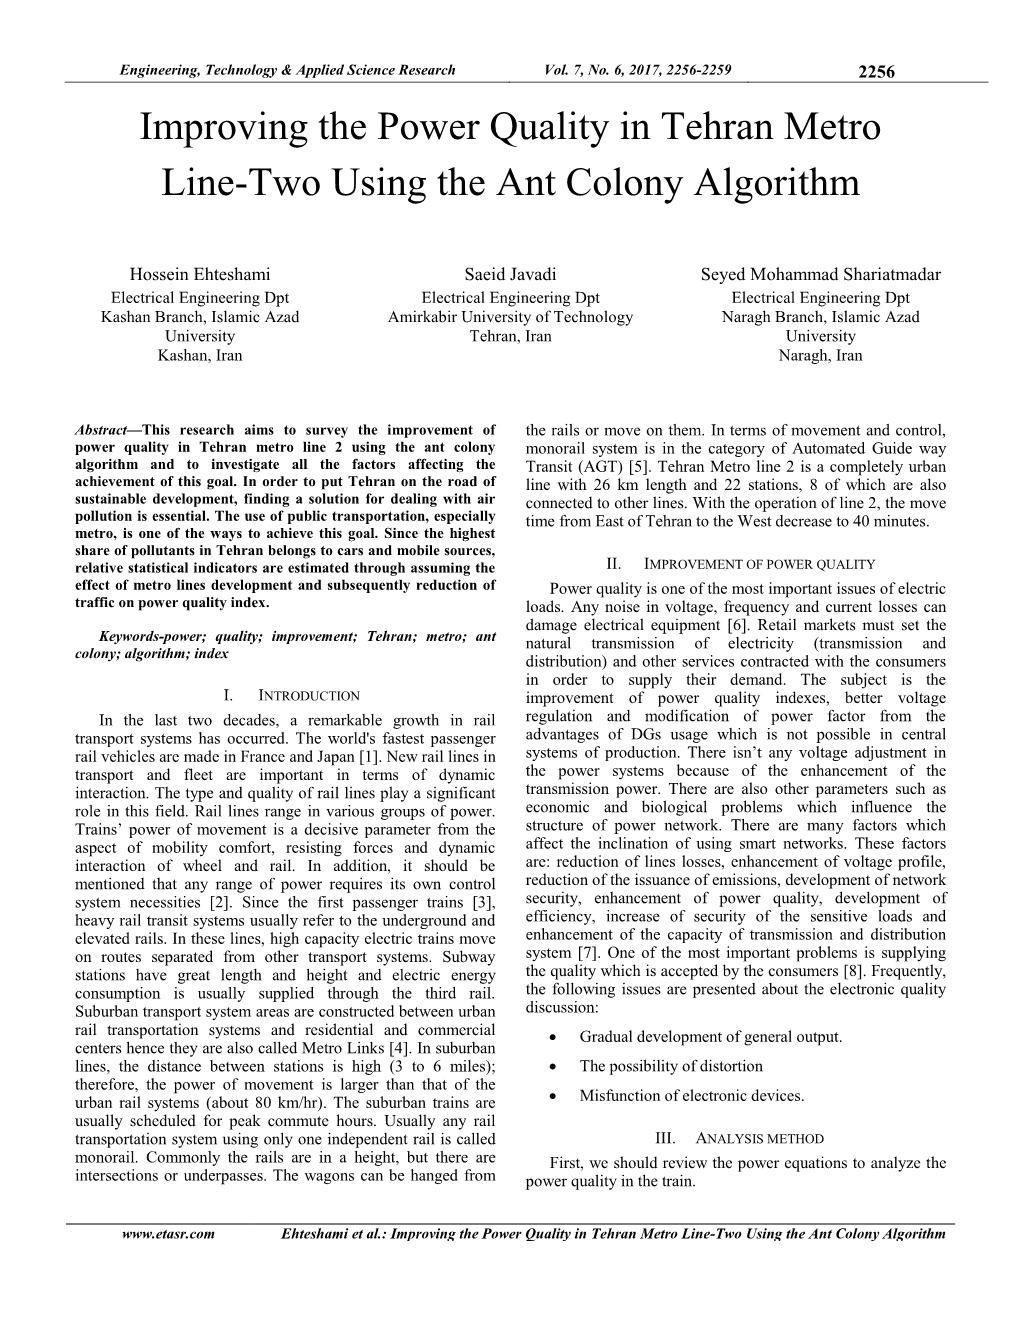 Improving the Power Quality in Tehran Metro Line-Two Using the Ant Colony Algorithm